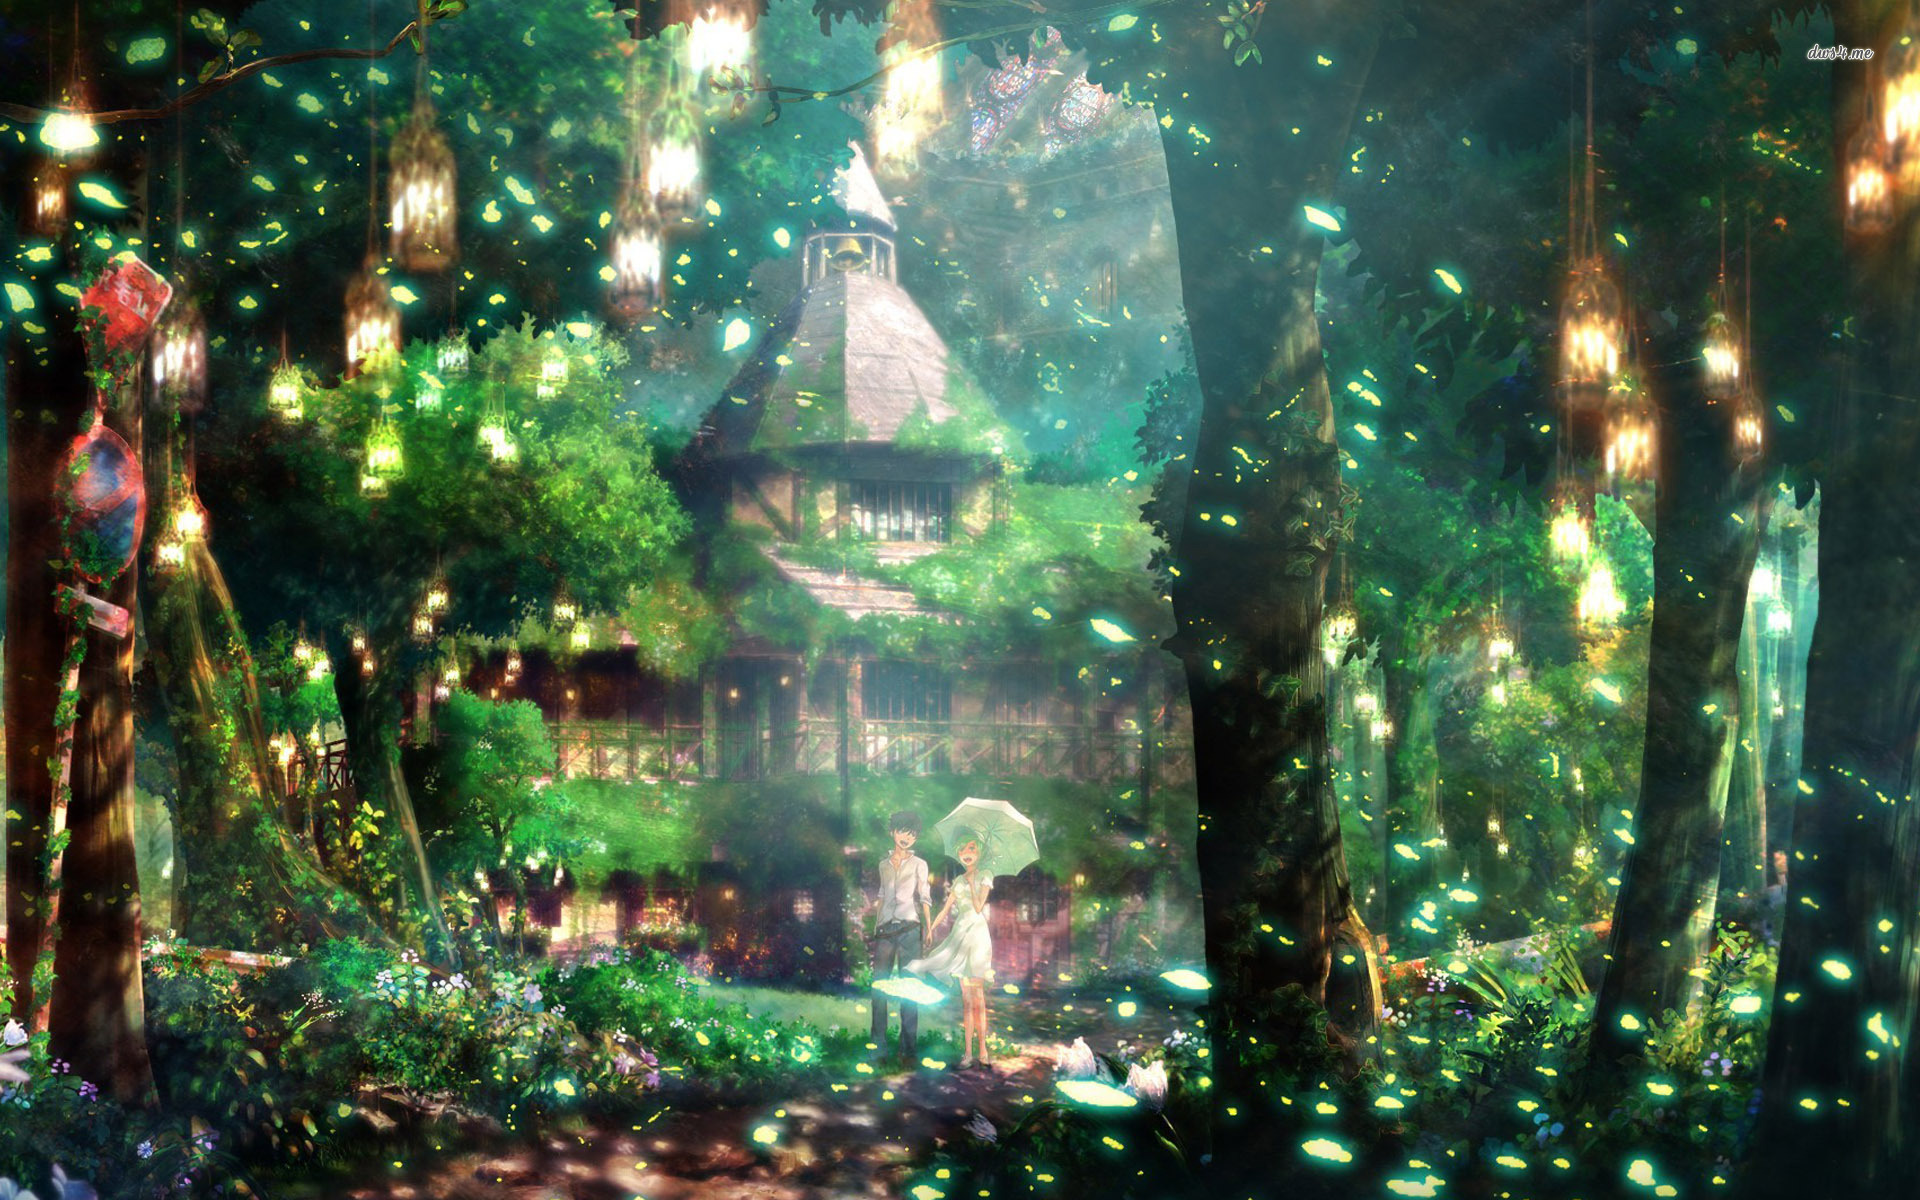 Magical forest wallpaper - Anime wallpapers - #8608